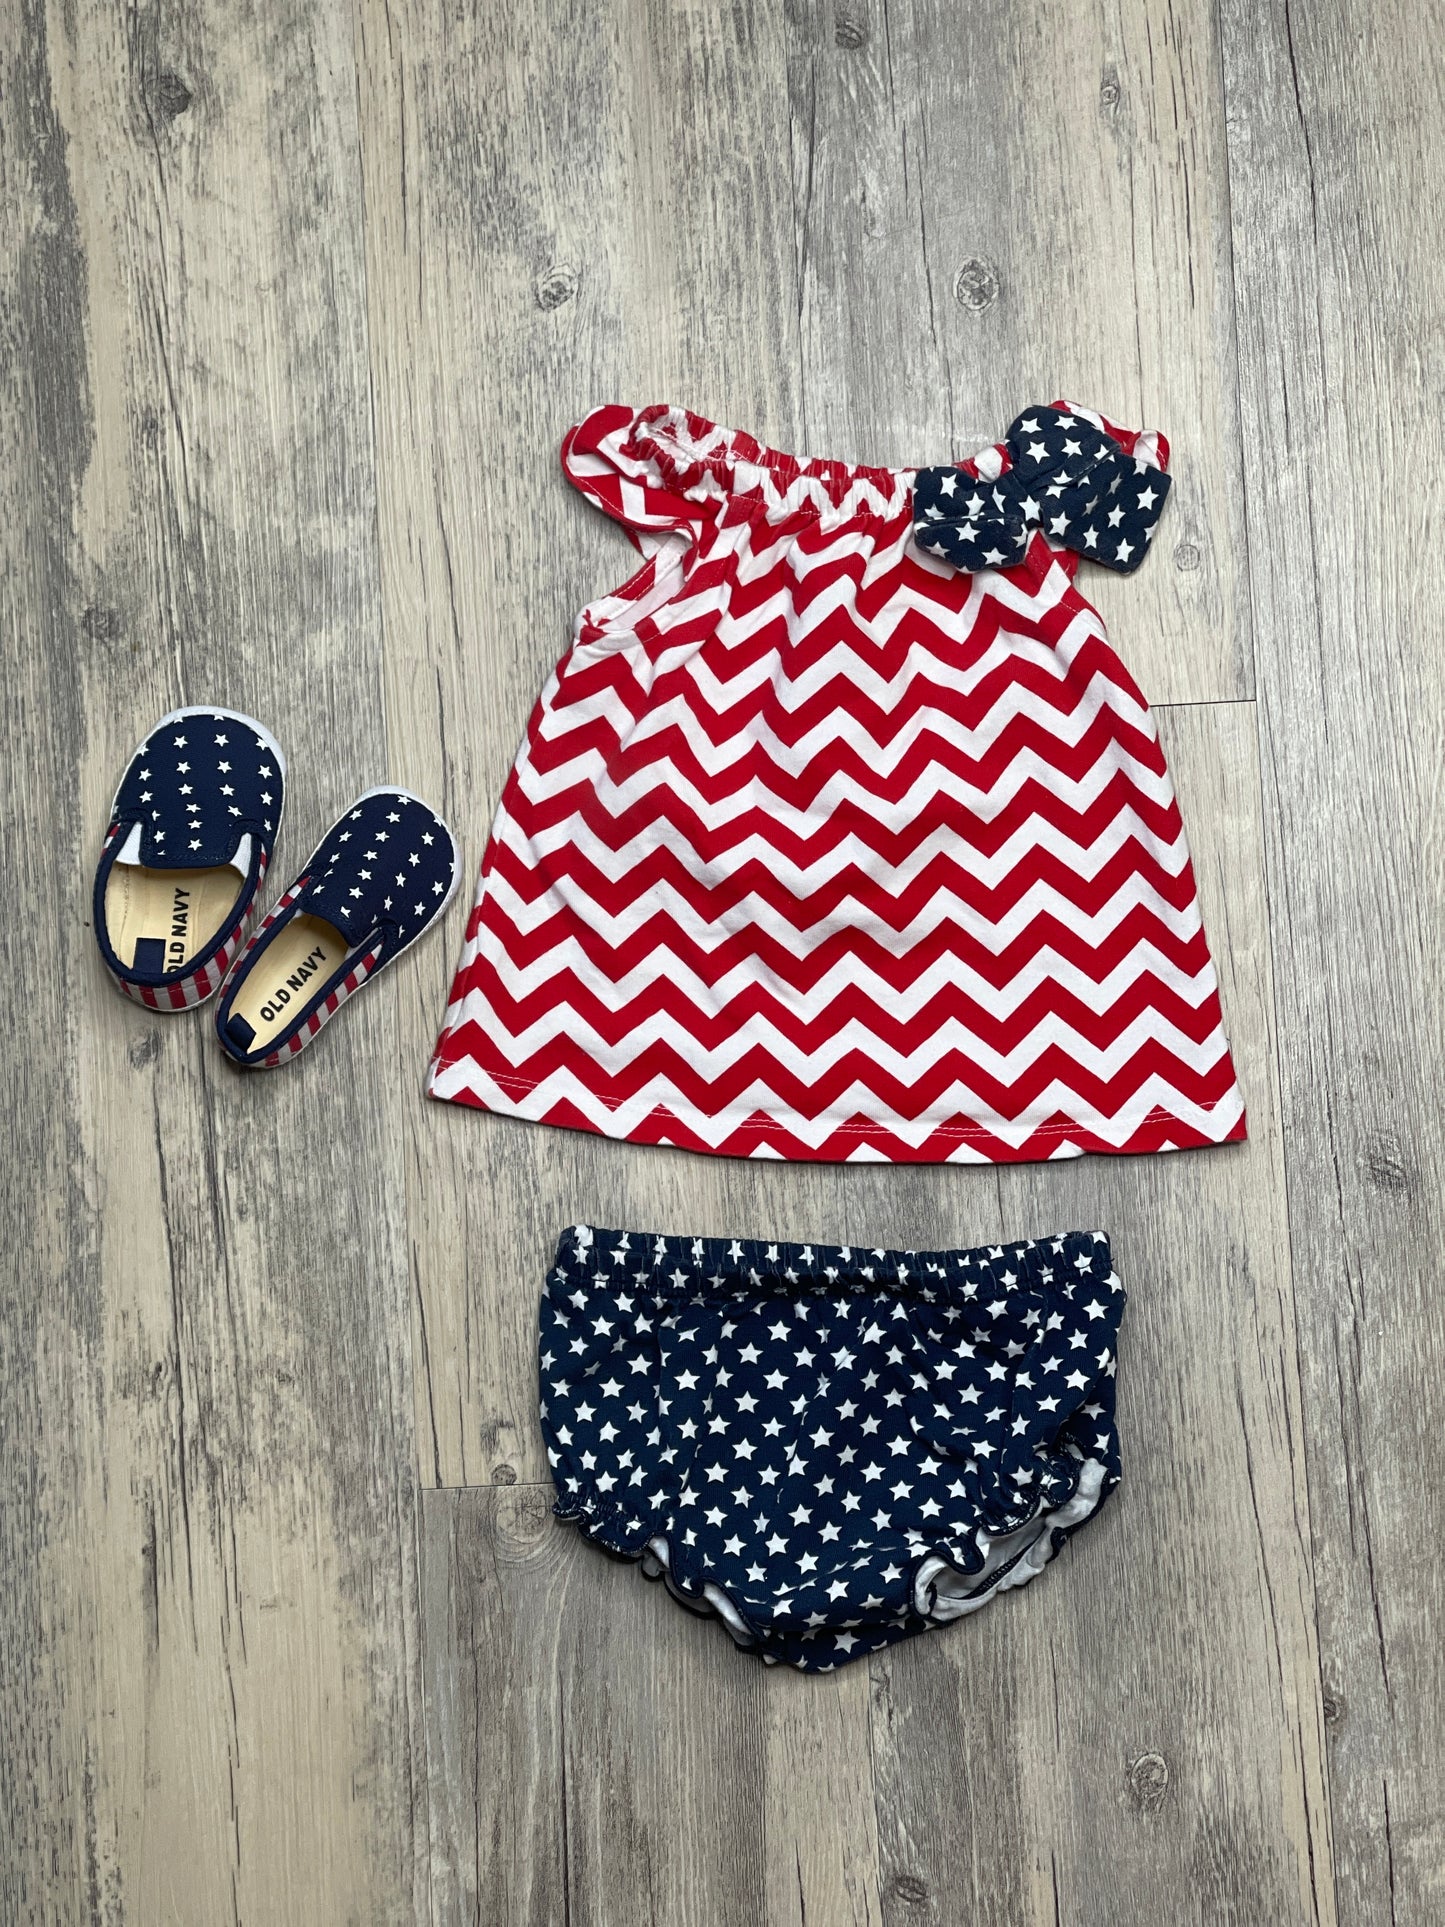 Ruffle Chevron Patriotic Tank and Bloomers with Shoe Set - 3/6 Months